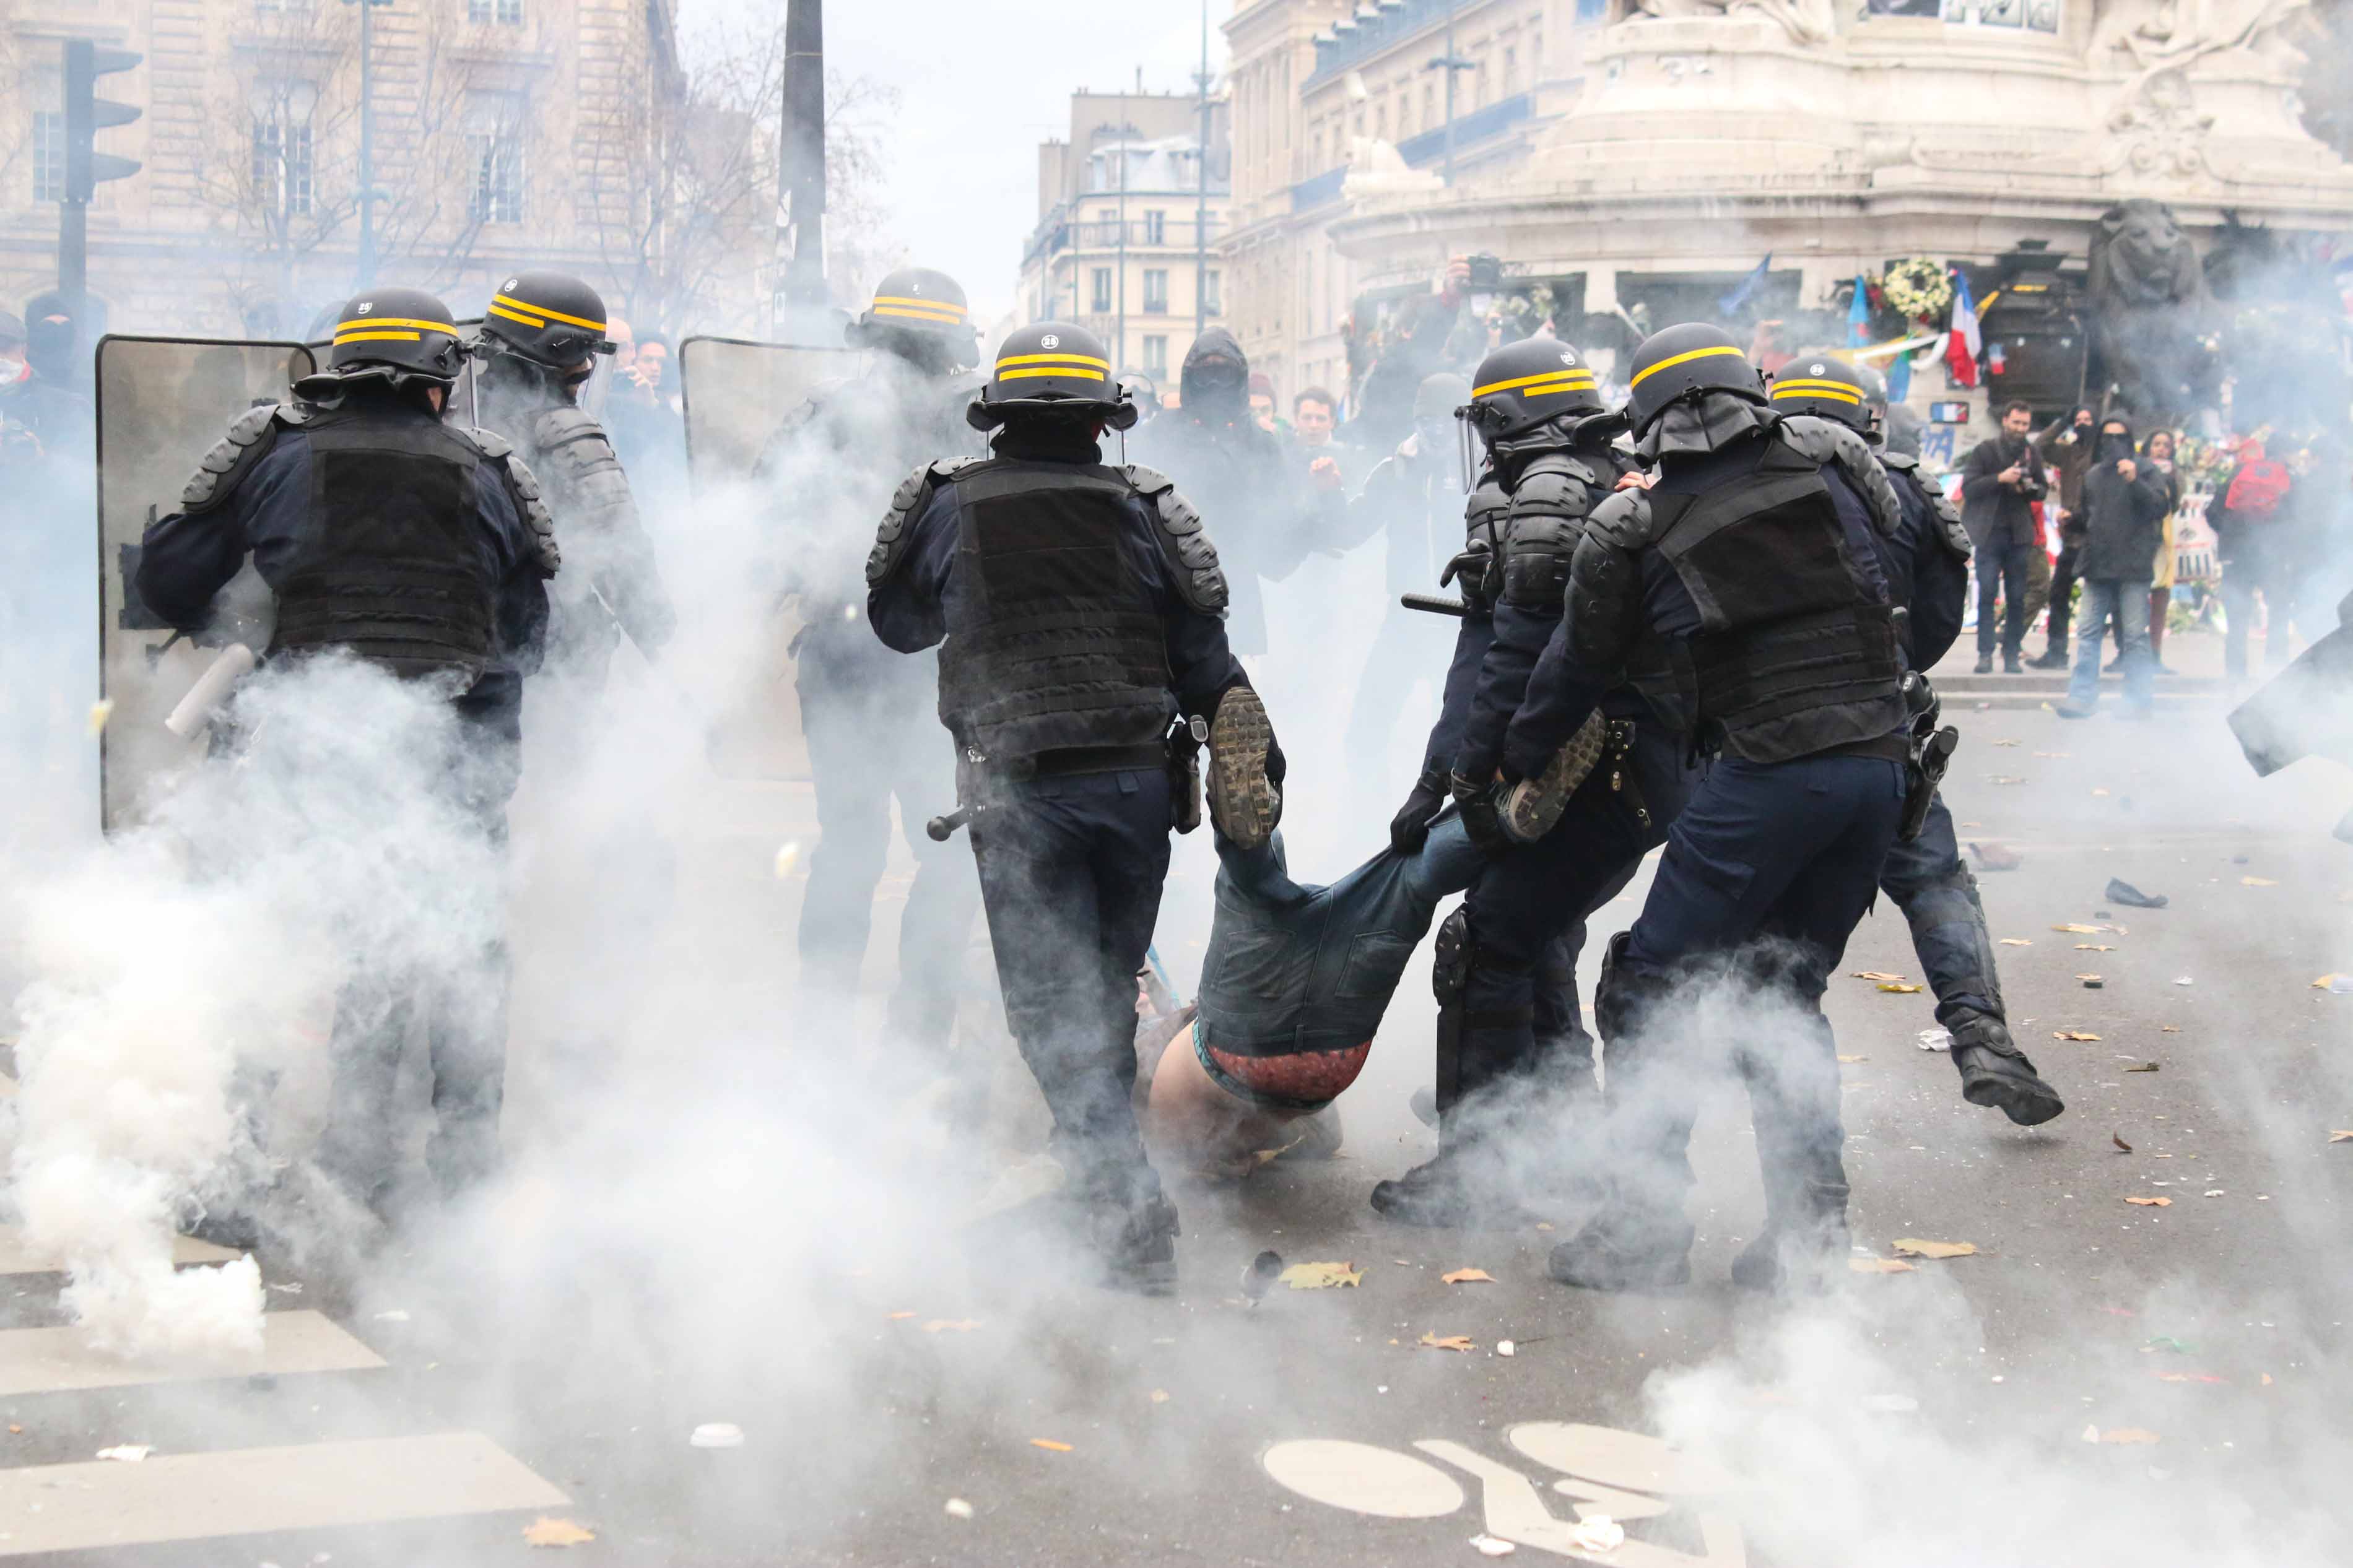 A man is violently arrested Place de la Republique, in Paris, France, during COP21 protests, November 29, 2015. The protests, foridden under France's emergency law, were met by heavy police force leading to escalating tensions.